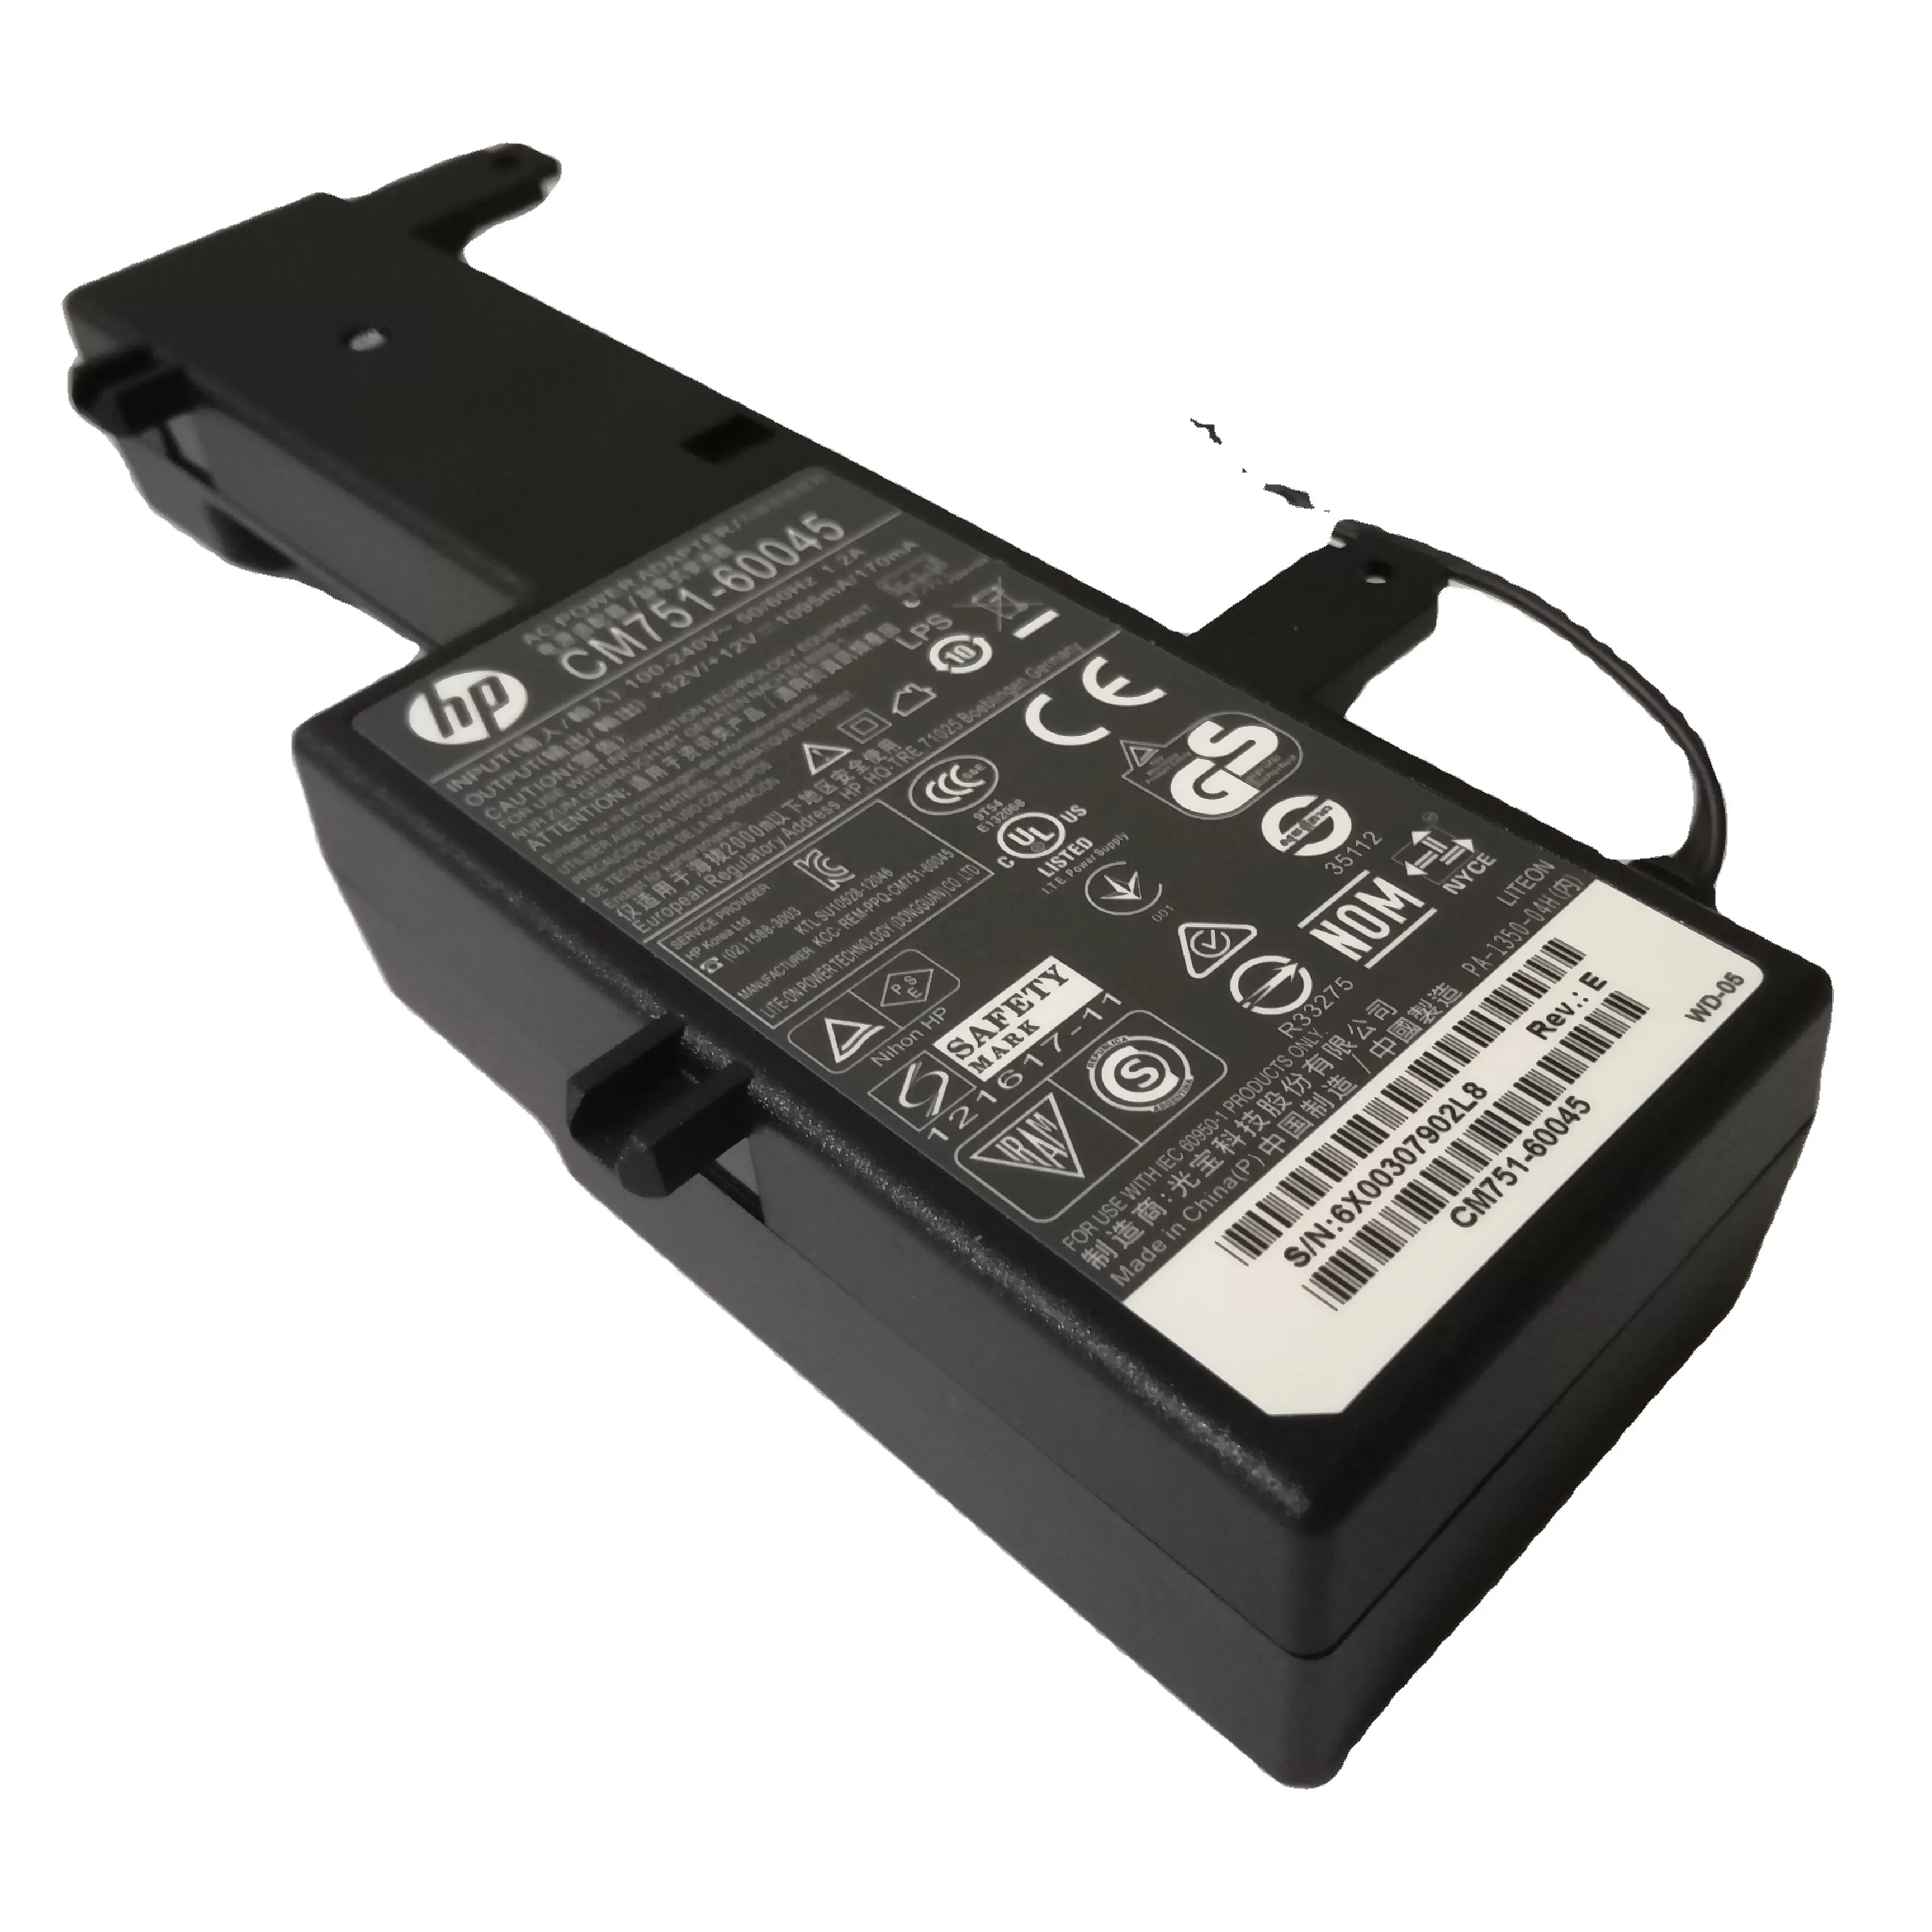 HP OfficeJet Pro 8100 8600 N811 N911 ACDCアダプター電源CM751-60045用の新しい純正PS